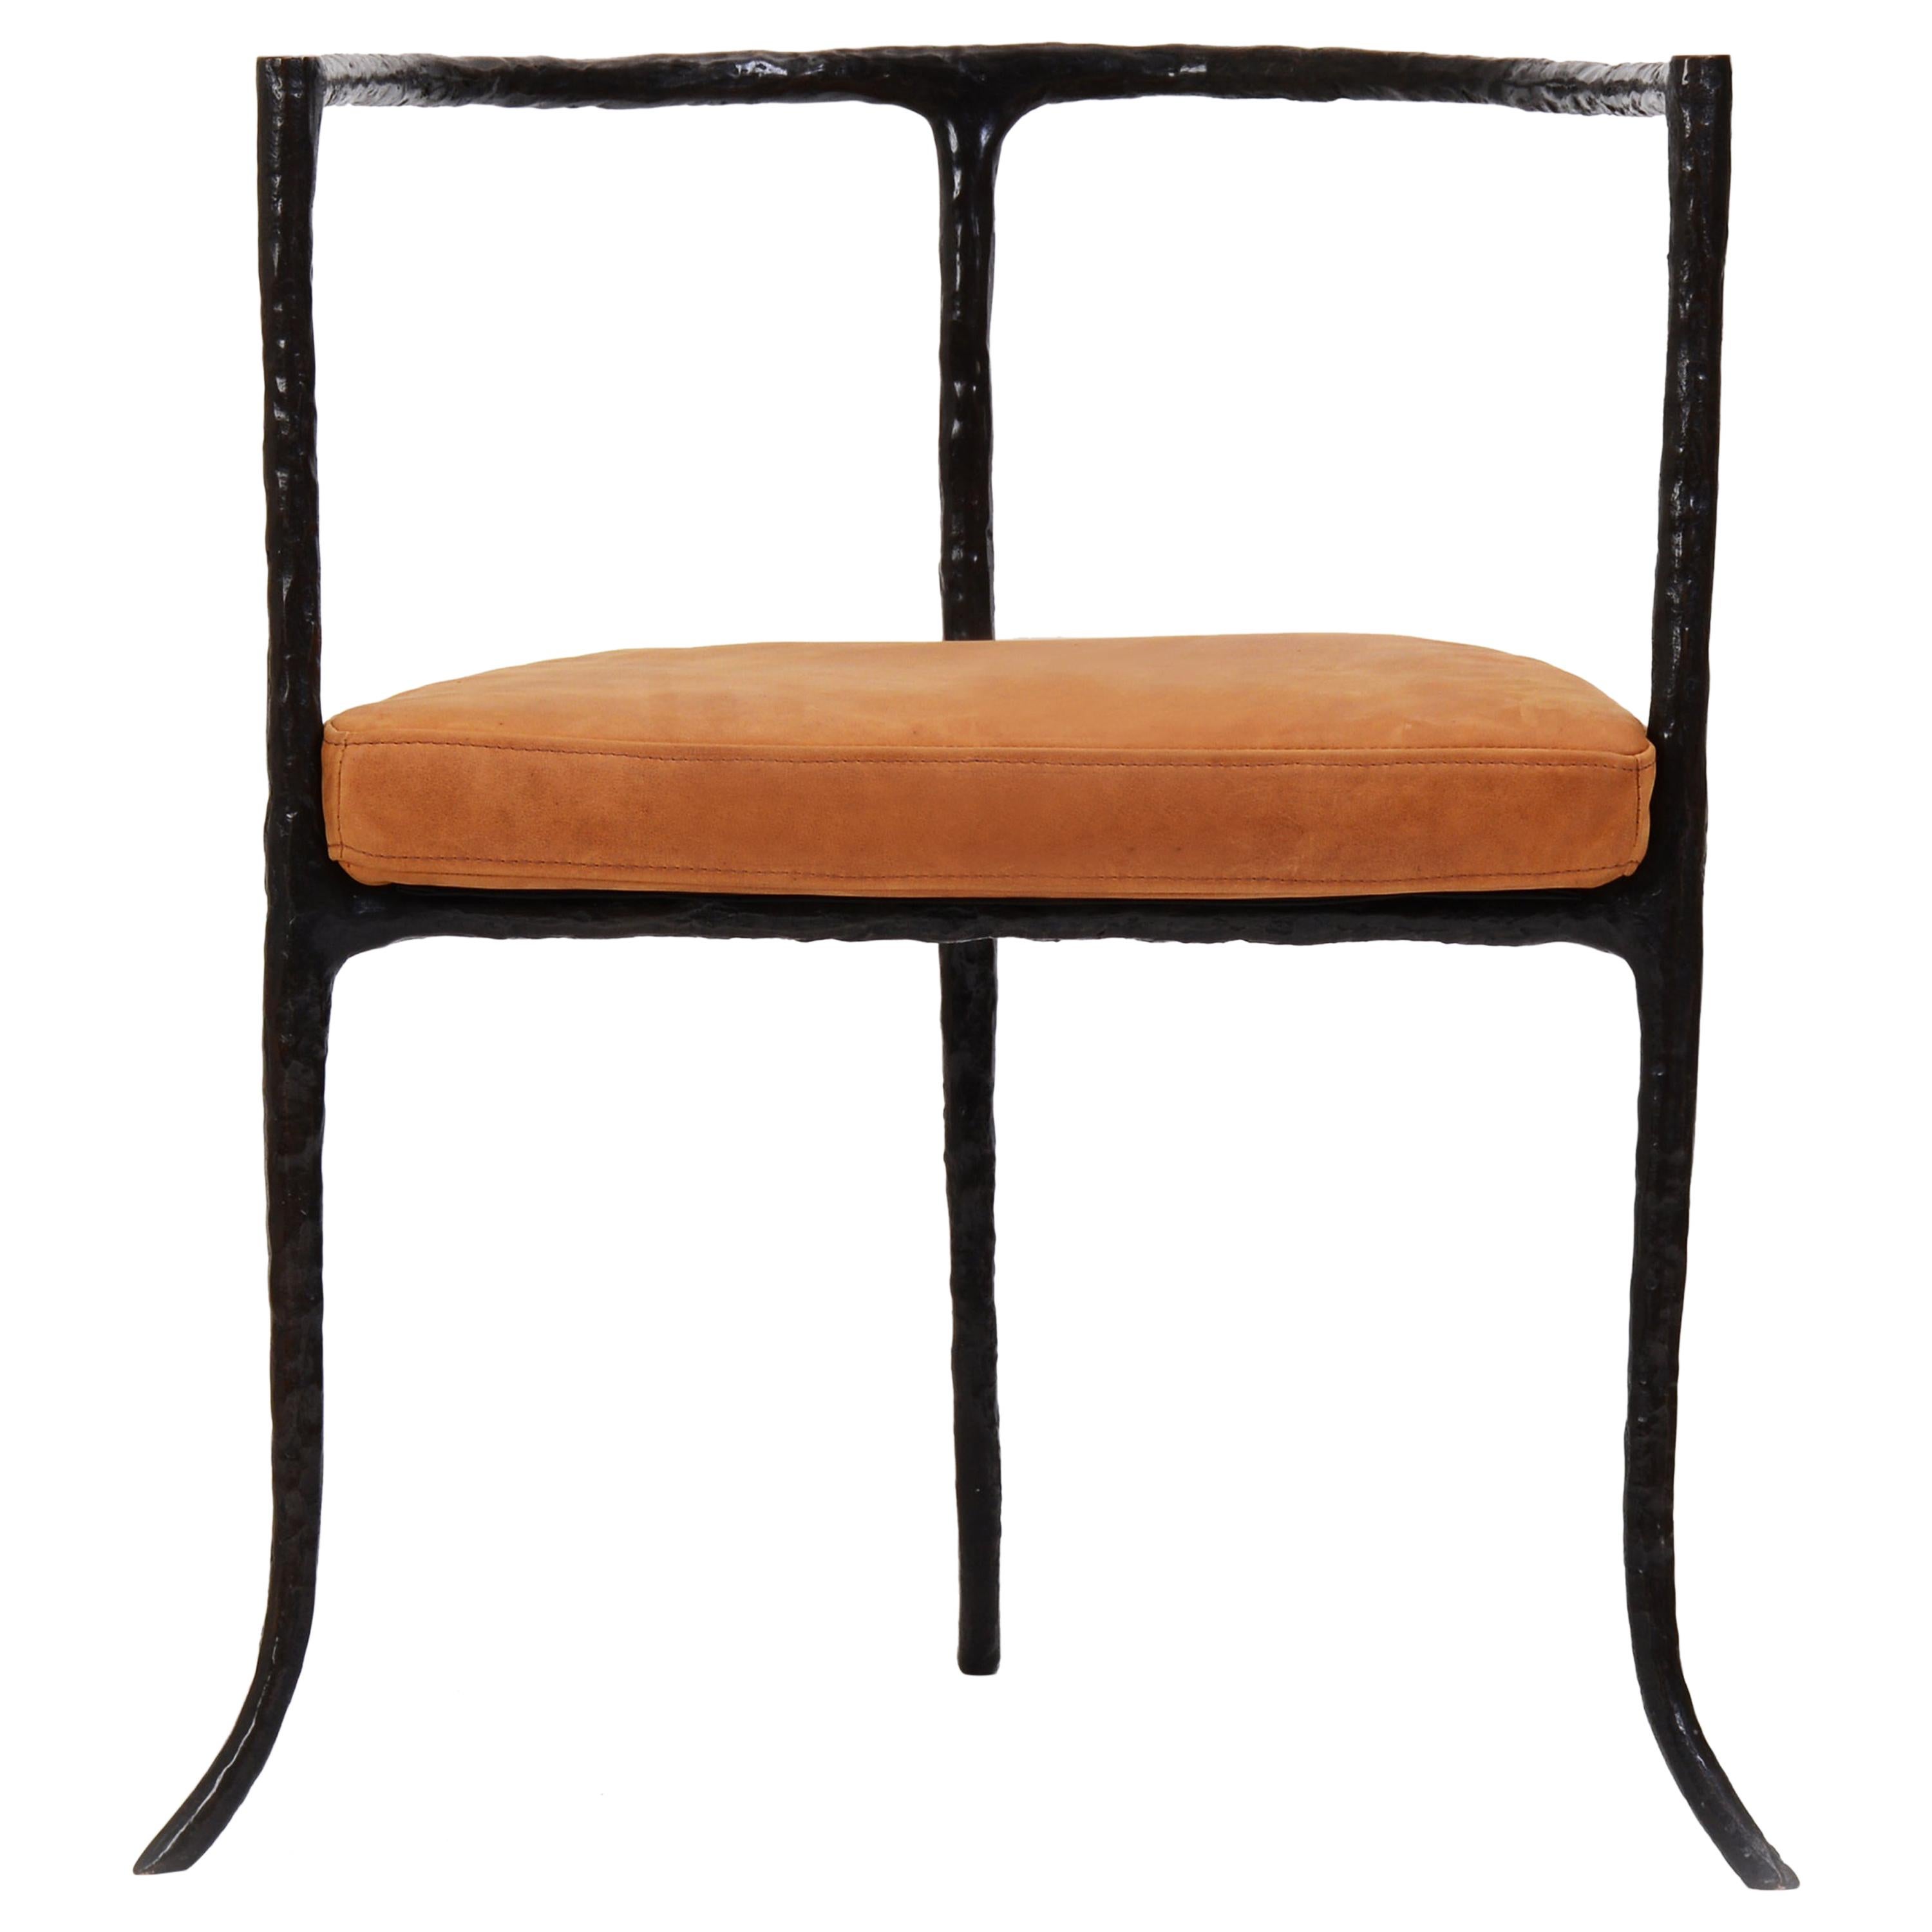 Twig Side Chair in Cast Bronze with Leather Seat by Elan Atelier (Preorder)